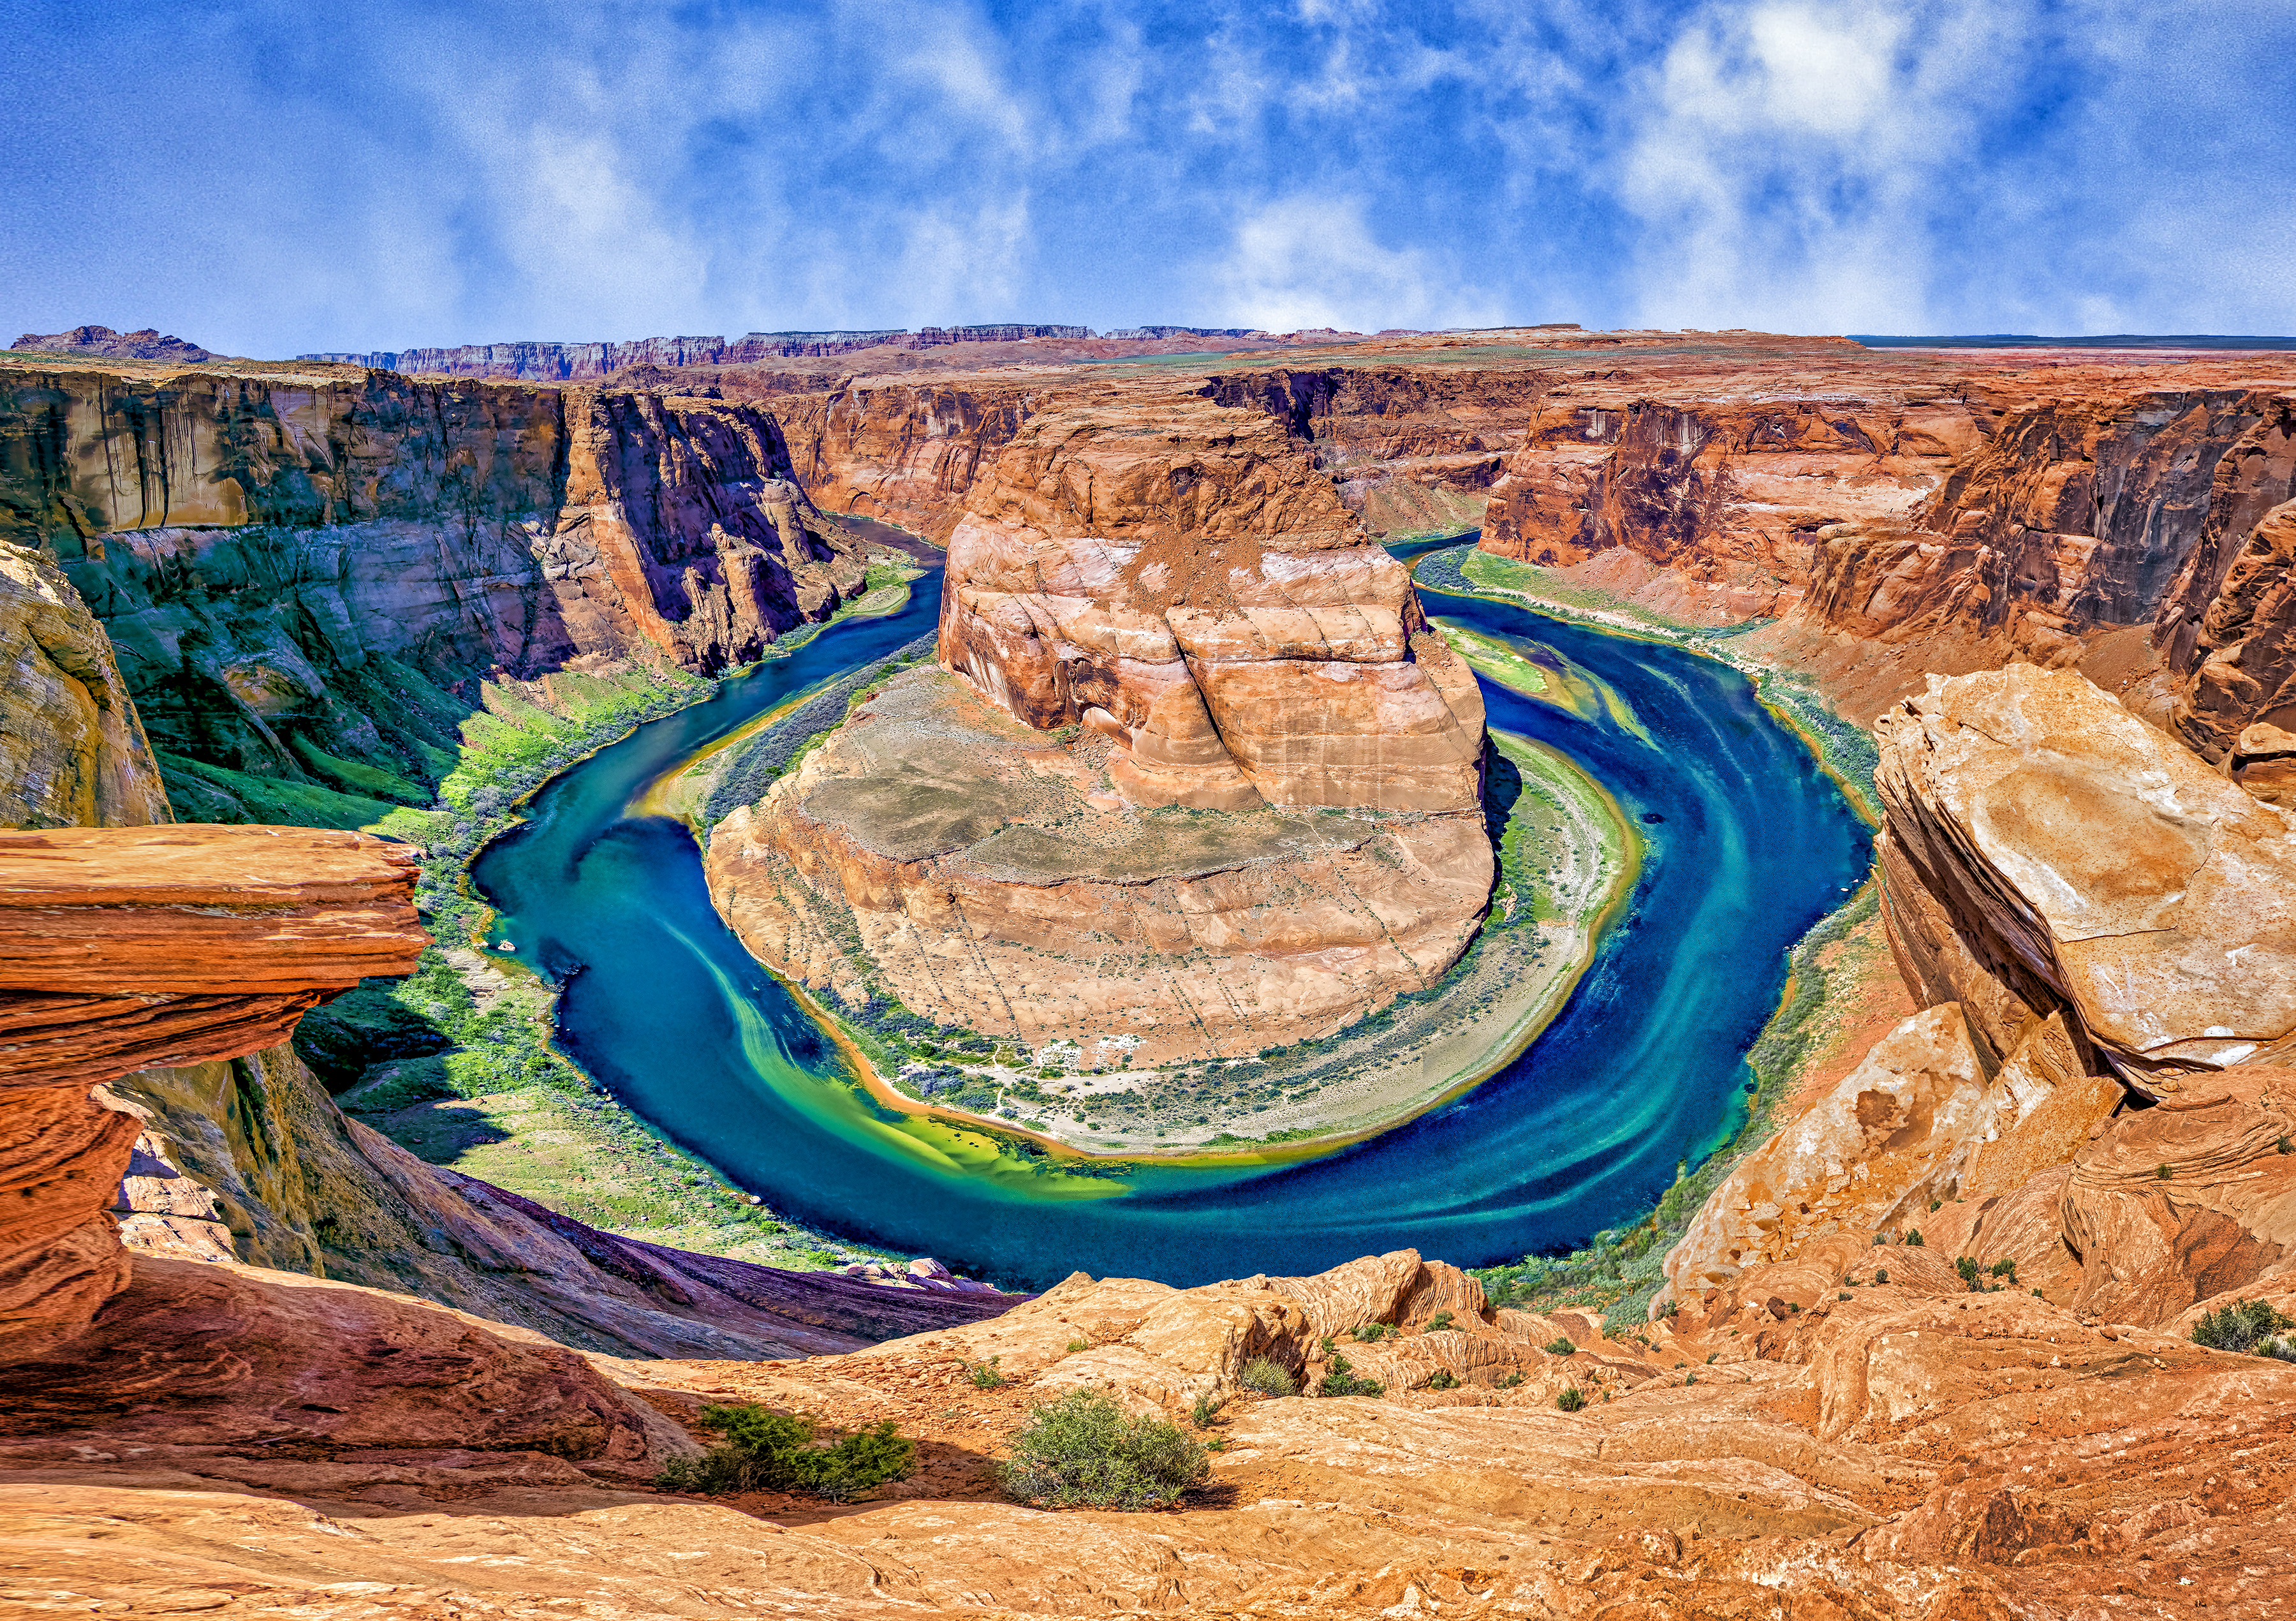 HORSESHOE BEND - A unique bend in the Colorado River near Page, AZ. It’s a 1000 foot drop from the overlook down to the river.